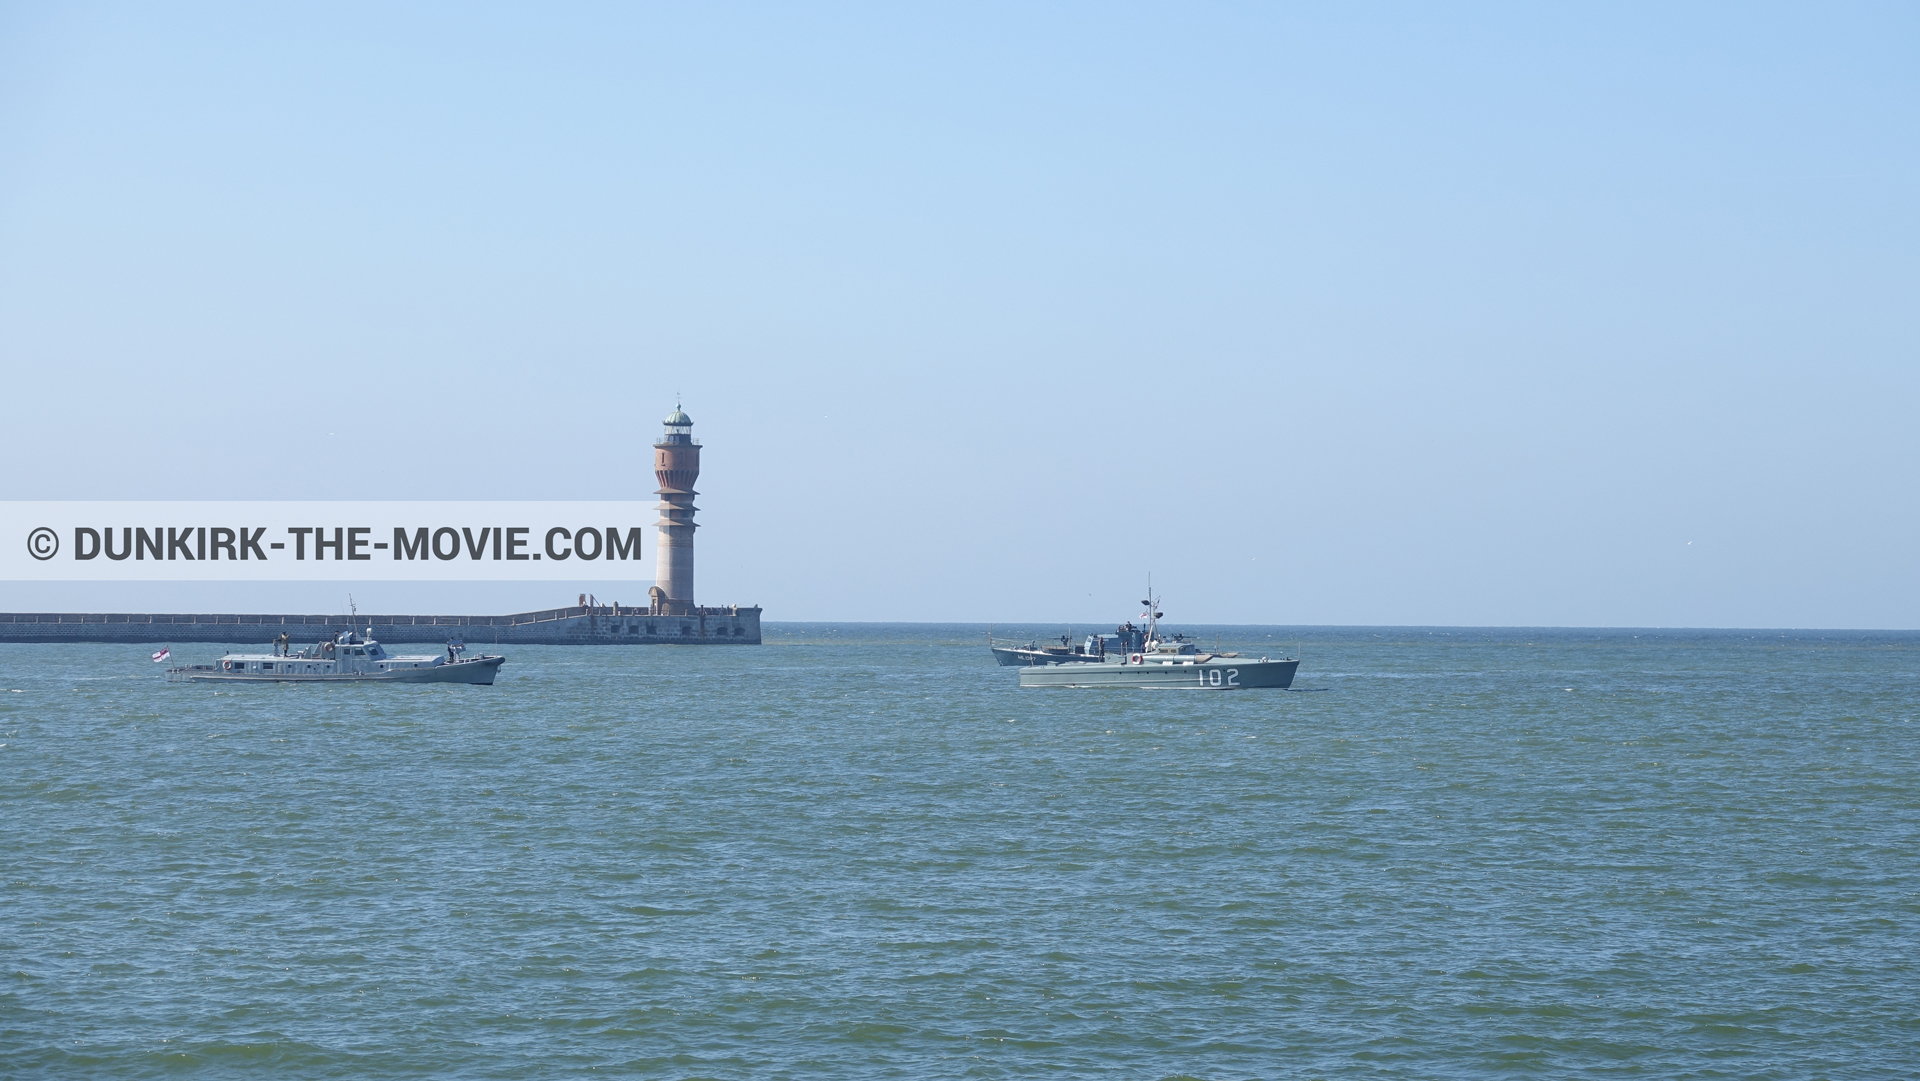 Picture with boat, blue sky, St Pol sur Mer lighthouse, PR 22,  from behind the scene of the Dunkirk movie by Nolan